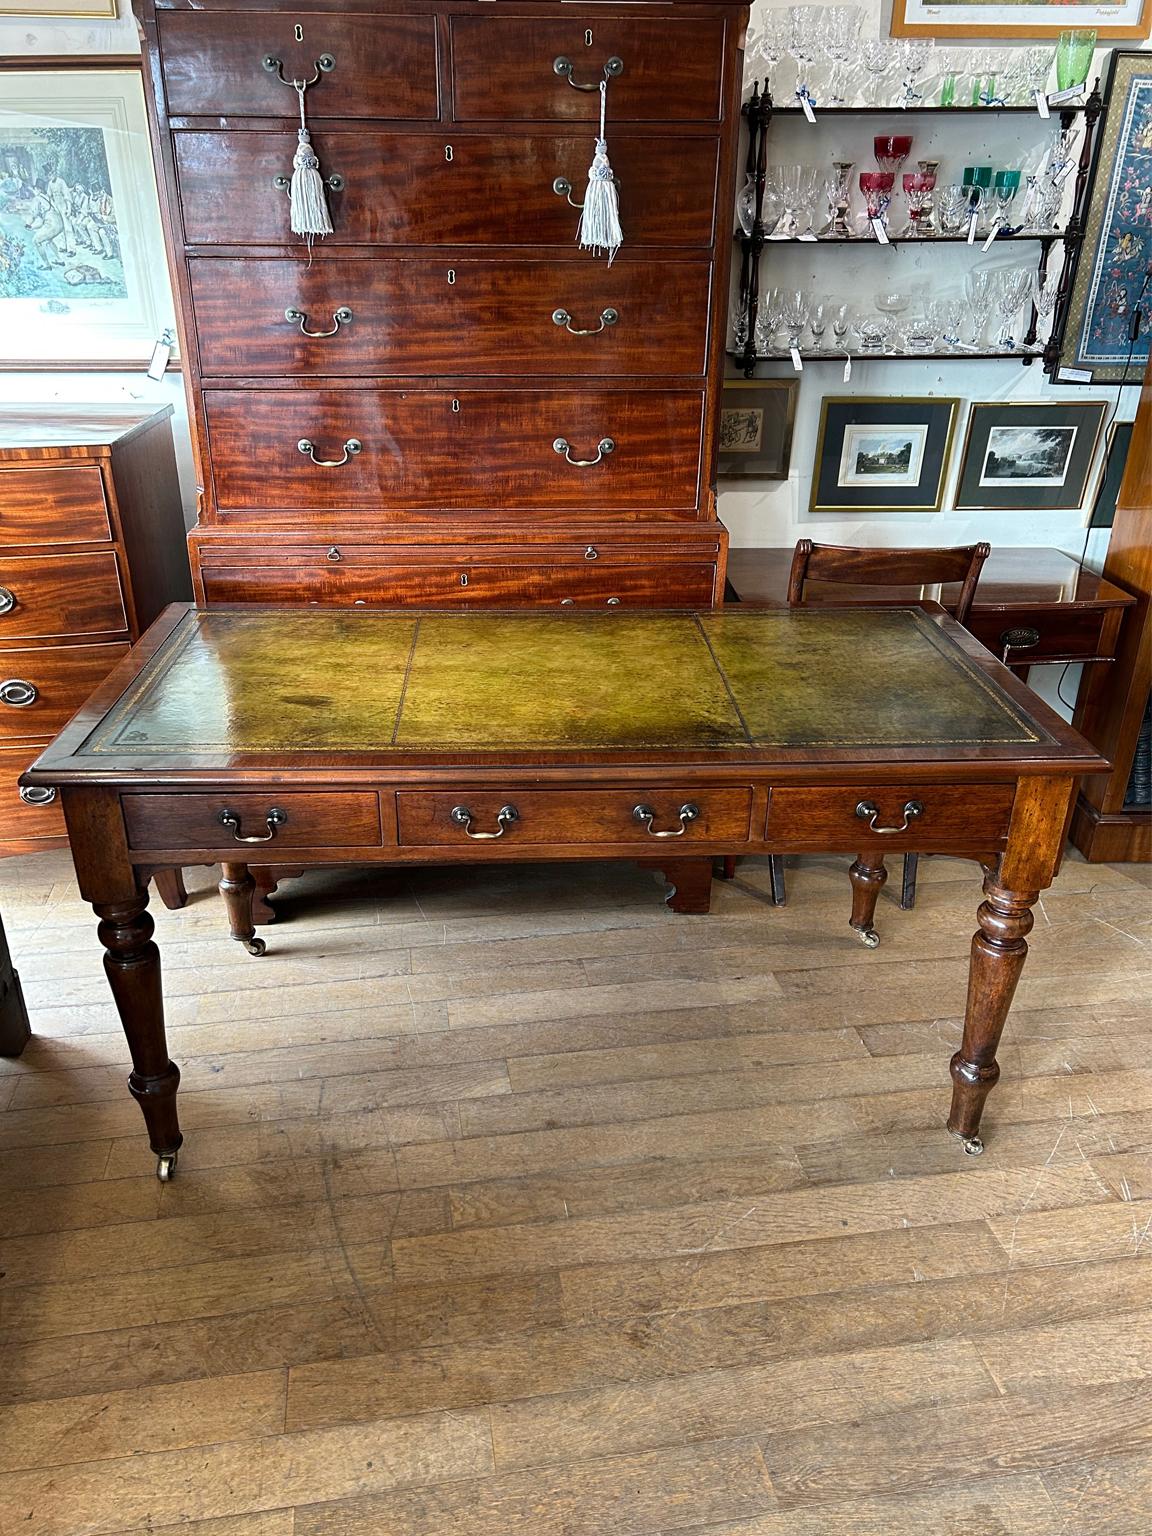 19th century Mahogany Library / writing table with green leathered writing surface, three drawers fitted with brass swan neck handles. On turned legs and brass original castors to base.

circa: 1850

Dimensions:
Width: 59.5 inches – 151